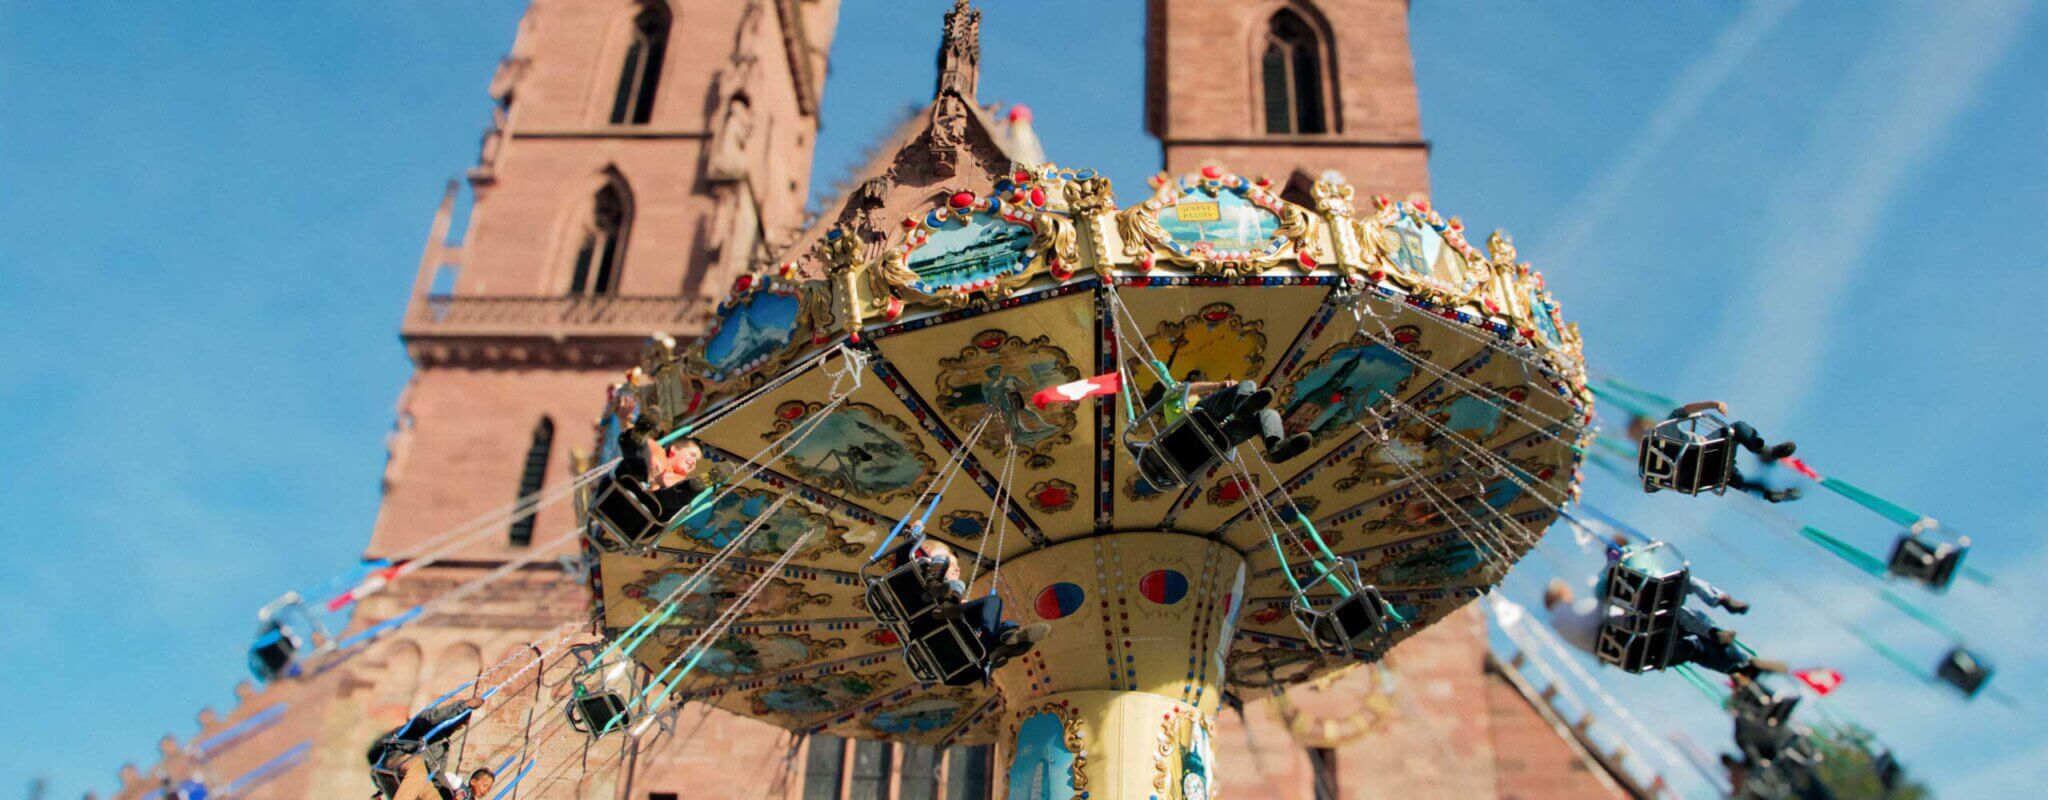 A cheerful carousel with colourful horses and other rides turns in front of the imposing Elisabethenkirche in Basel. Children and adults laugh and wave as they make their rounds. The church rises majestically in the background, with its tall bell tower and richly decorated façade.